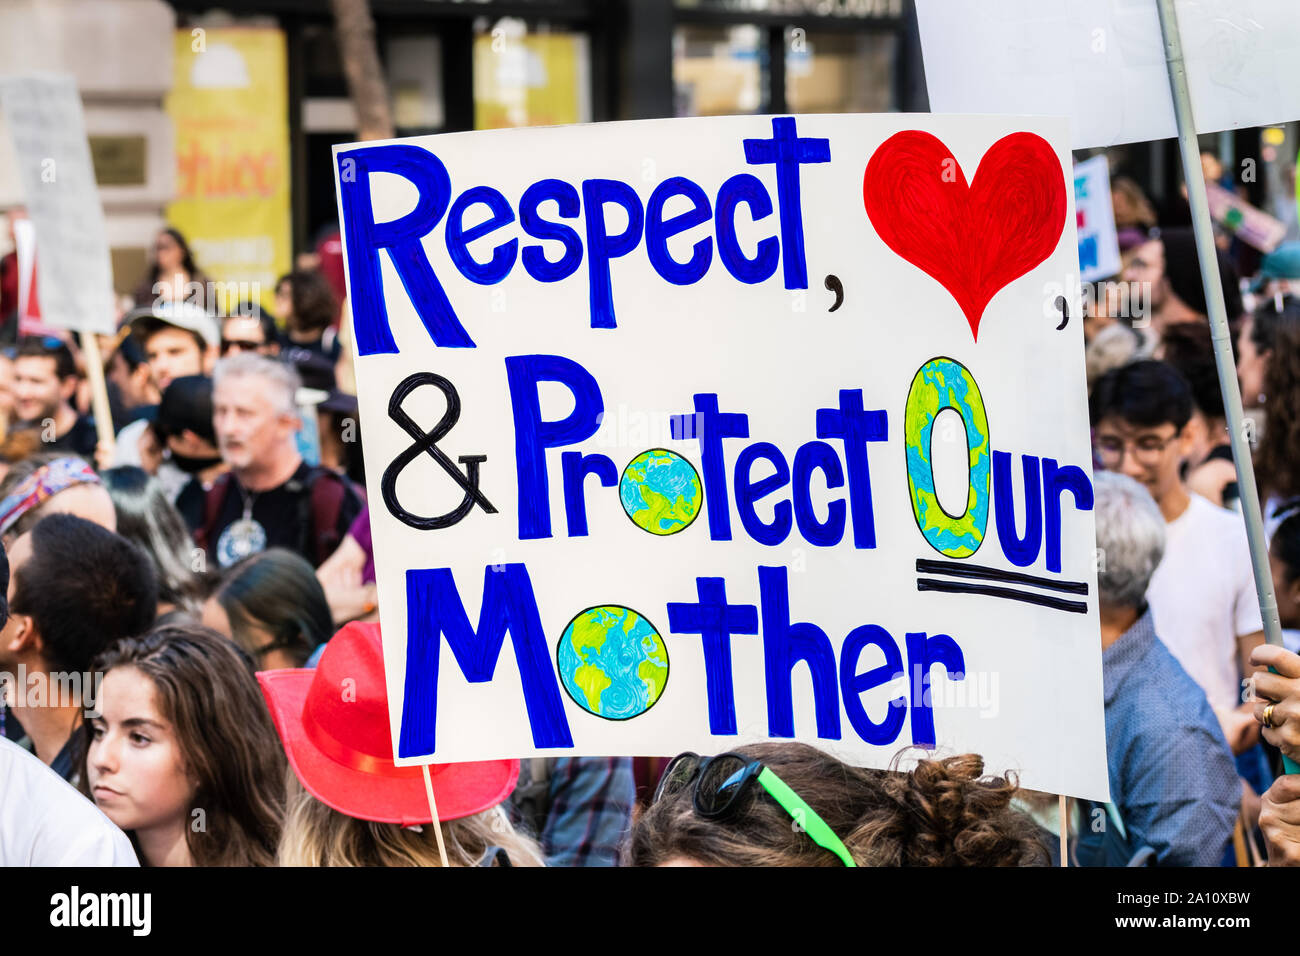 Sep 20, 2019 San Francisco / CA / USA - Respect & protect our mother placard raised at the Global Youth Climate Strike Rally and March in downtown San Stock Photo